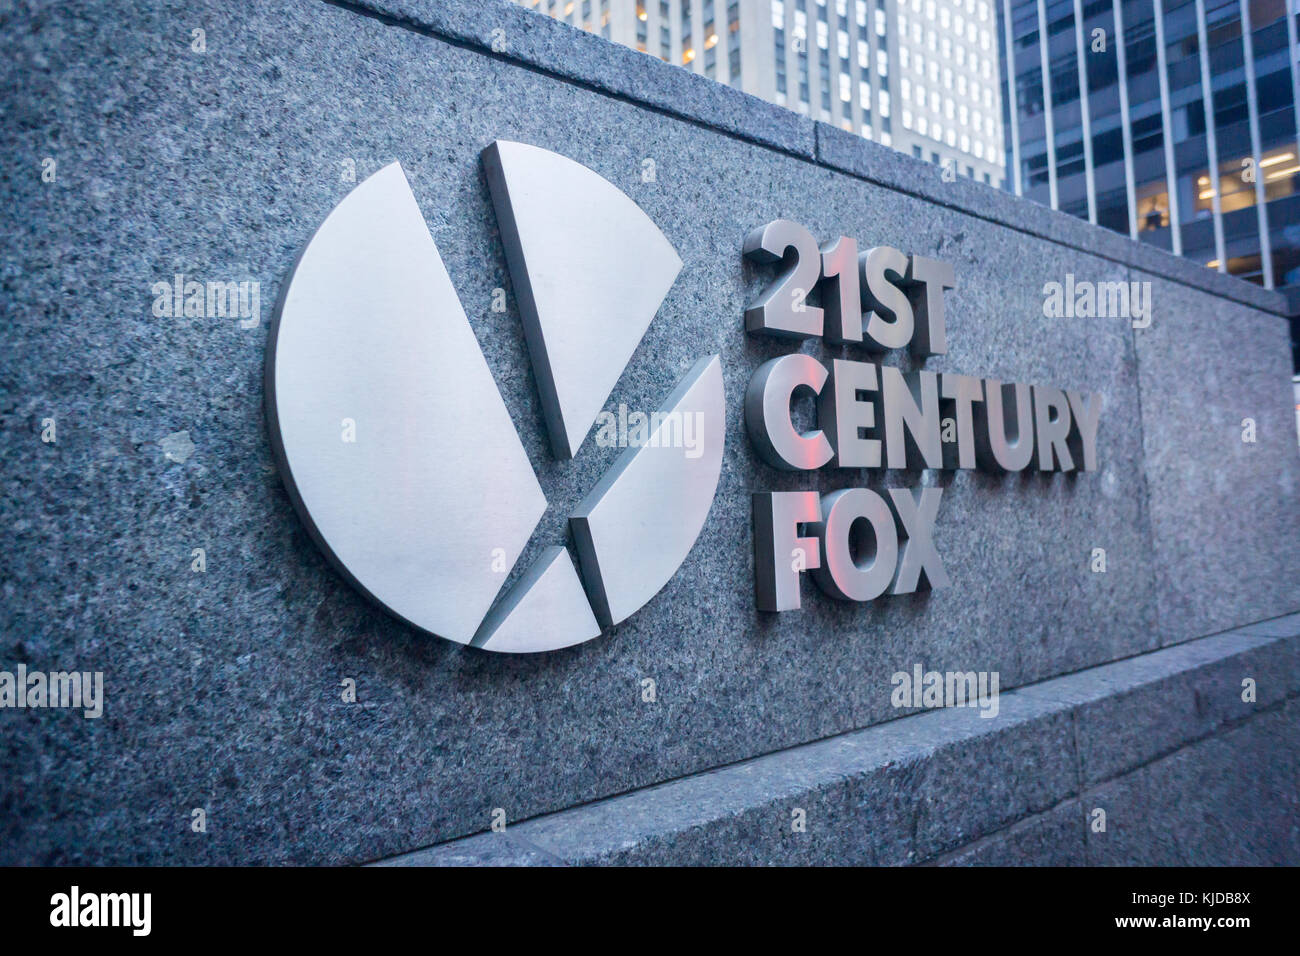 The 21st Century Fox logo on the News Corp. headquarters in Midtown Manhattan in New York on Friday, November 17, 2017. After Disney has been reported to be interested in buying 21St Century Fox from News Corp., Comcast, Verizon Communications and Sony Pictures Entertainment are also reported to be making overtures. (© Richard B. Levine) Stock Photo